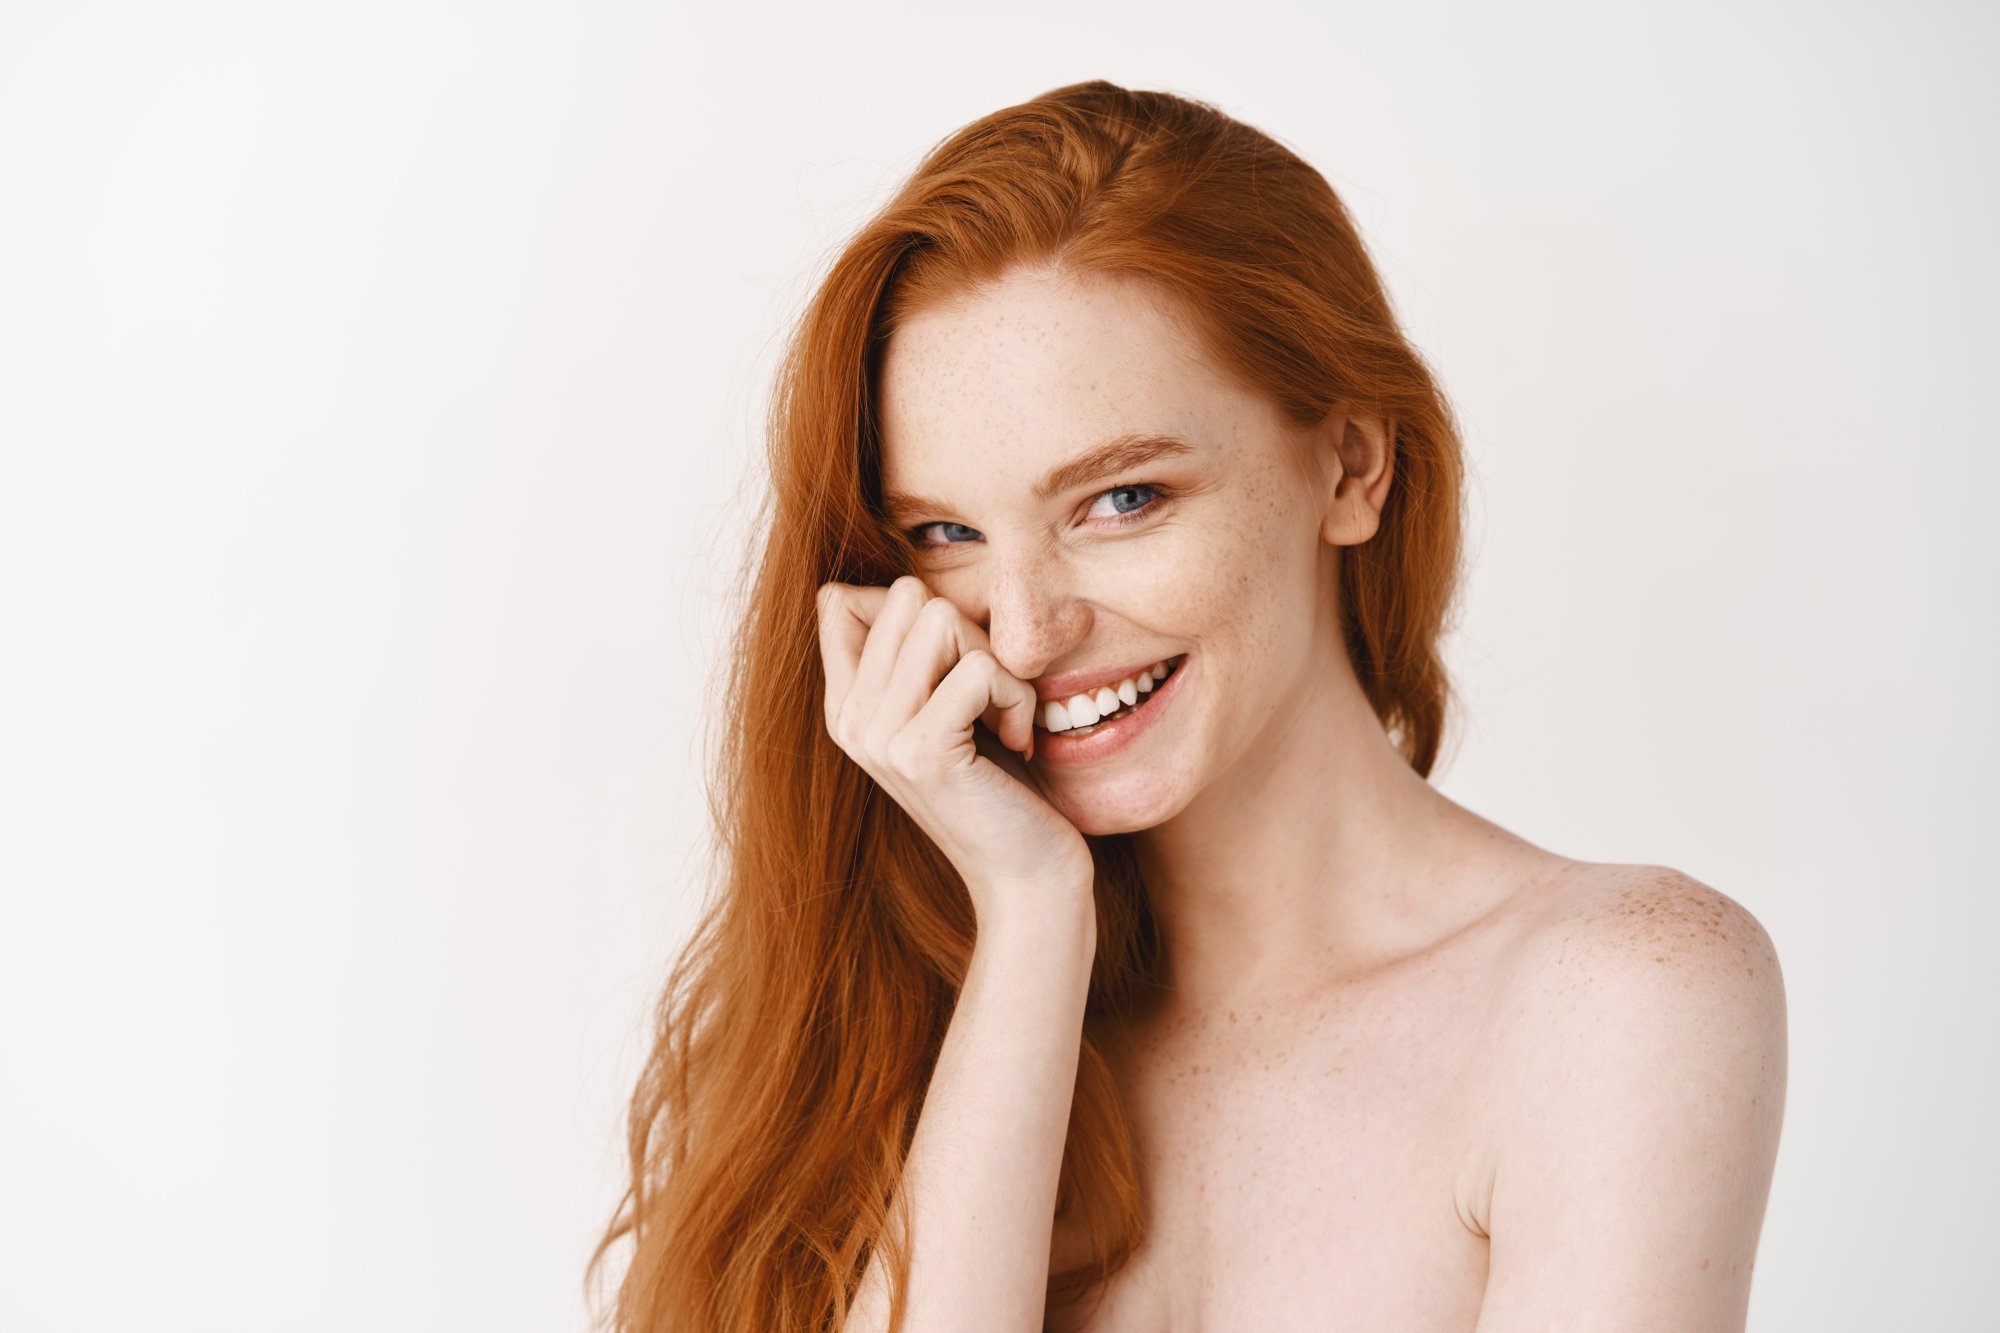 close-up-happy-redhead-woman-with-pale-perfect-skin-laughing-showing-white-teeth-standing-naked-studio-wall.jpg